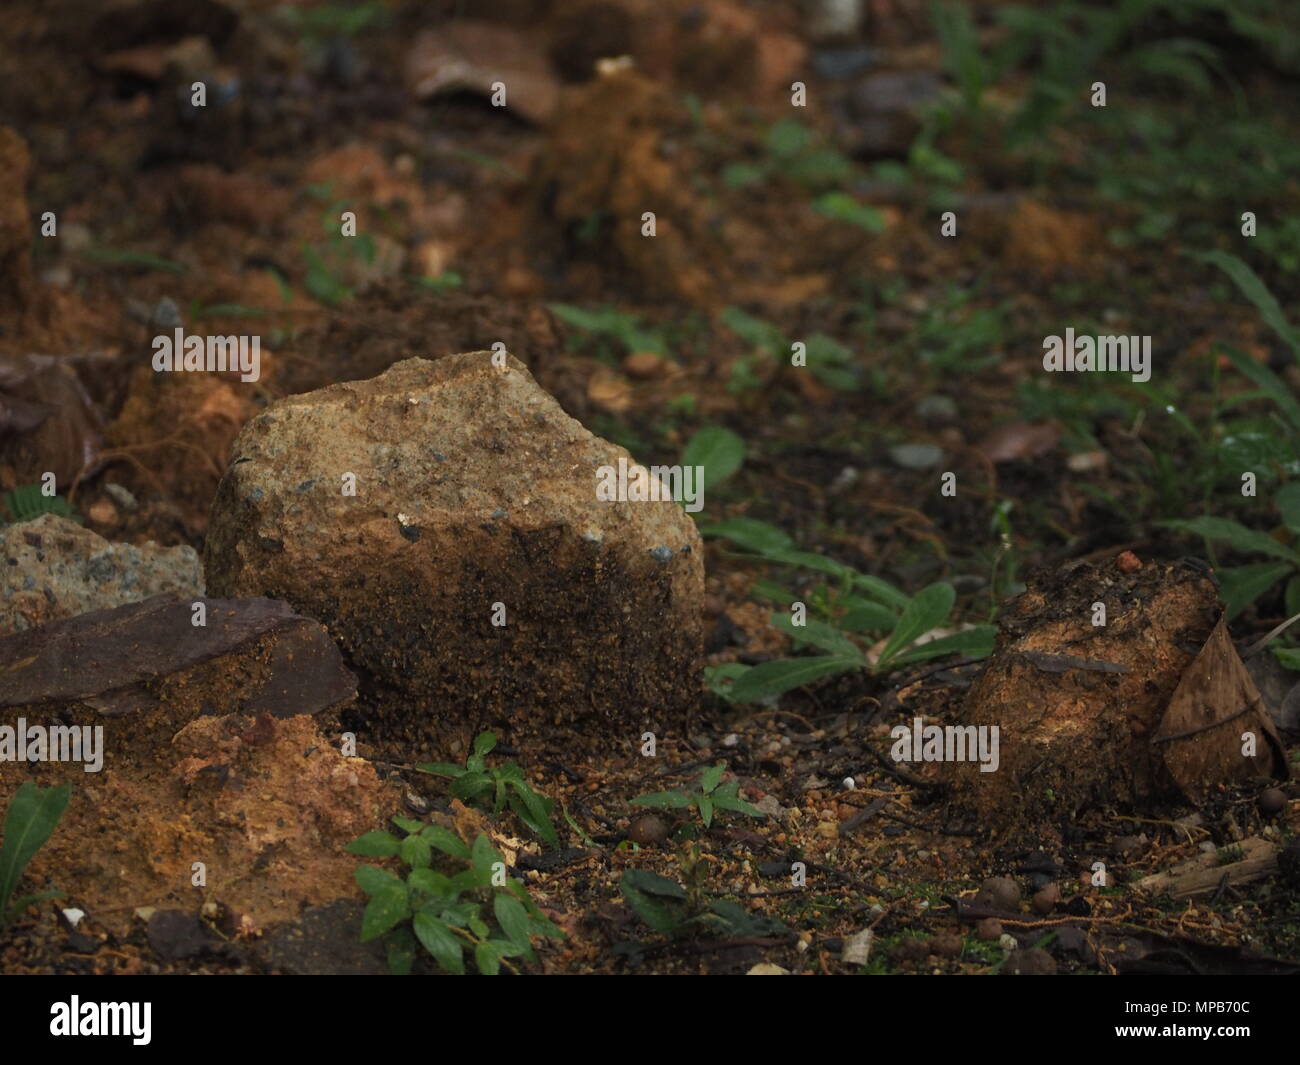 A stone on moist soil in a tropical environment. Stock Photo